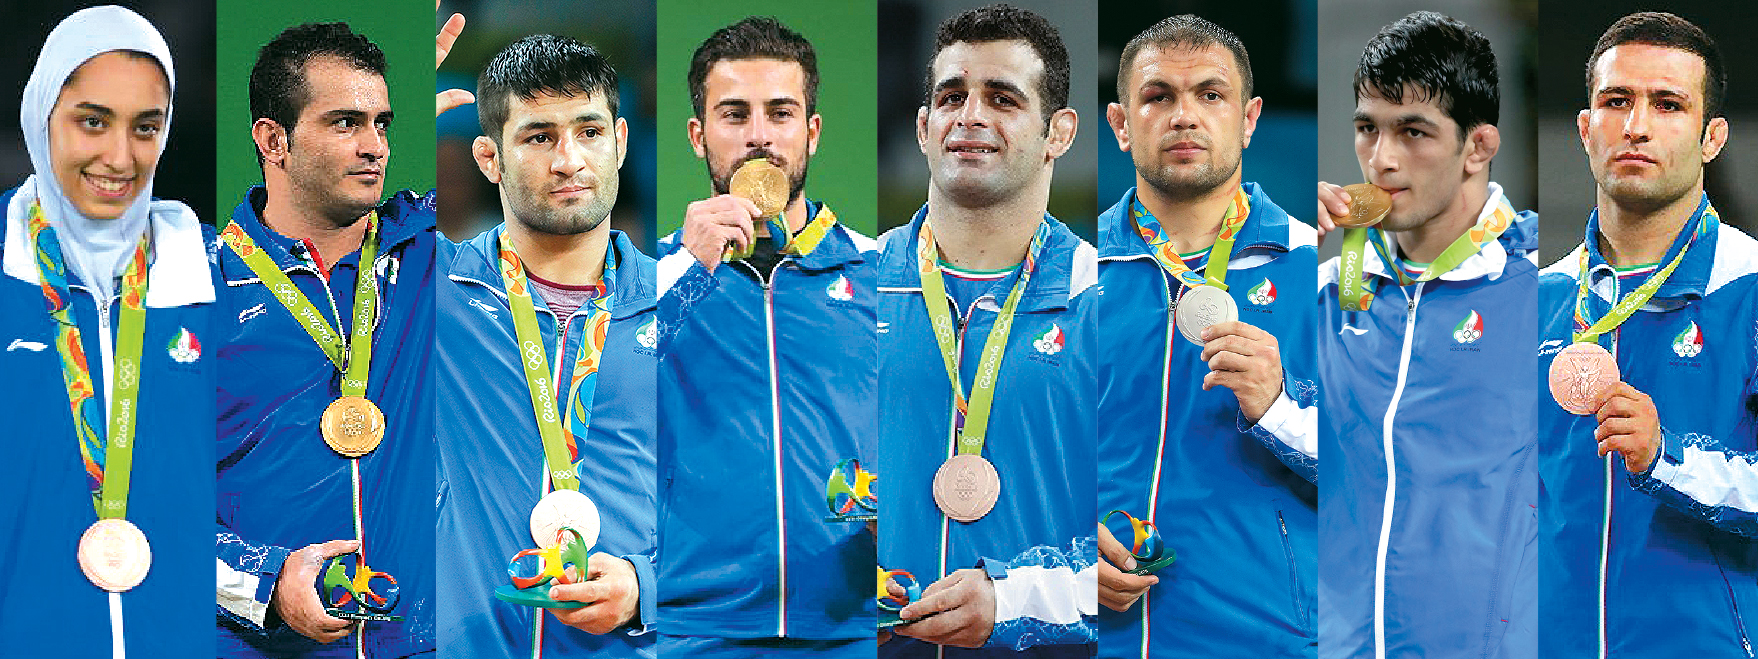 Iran Ends With 8 Medals in Rio